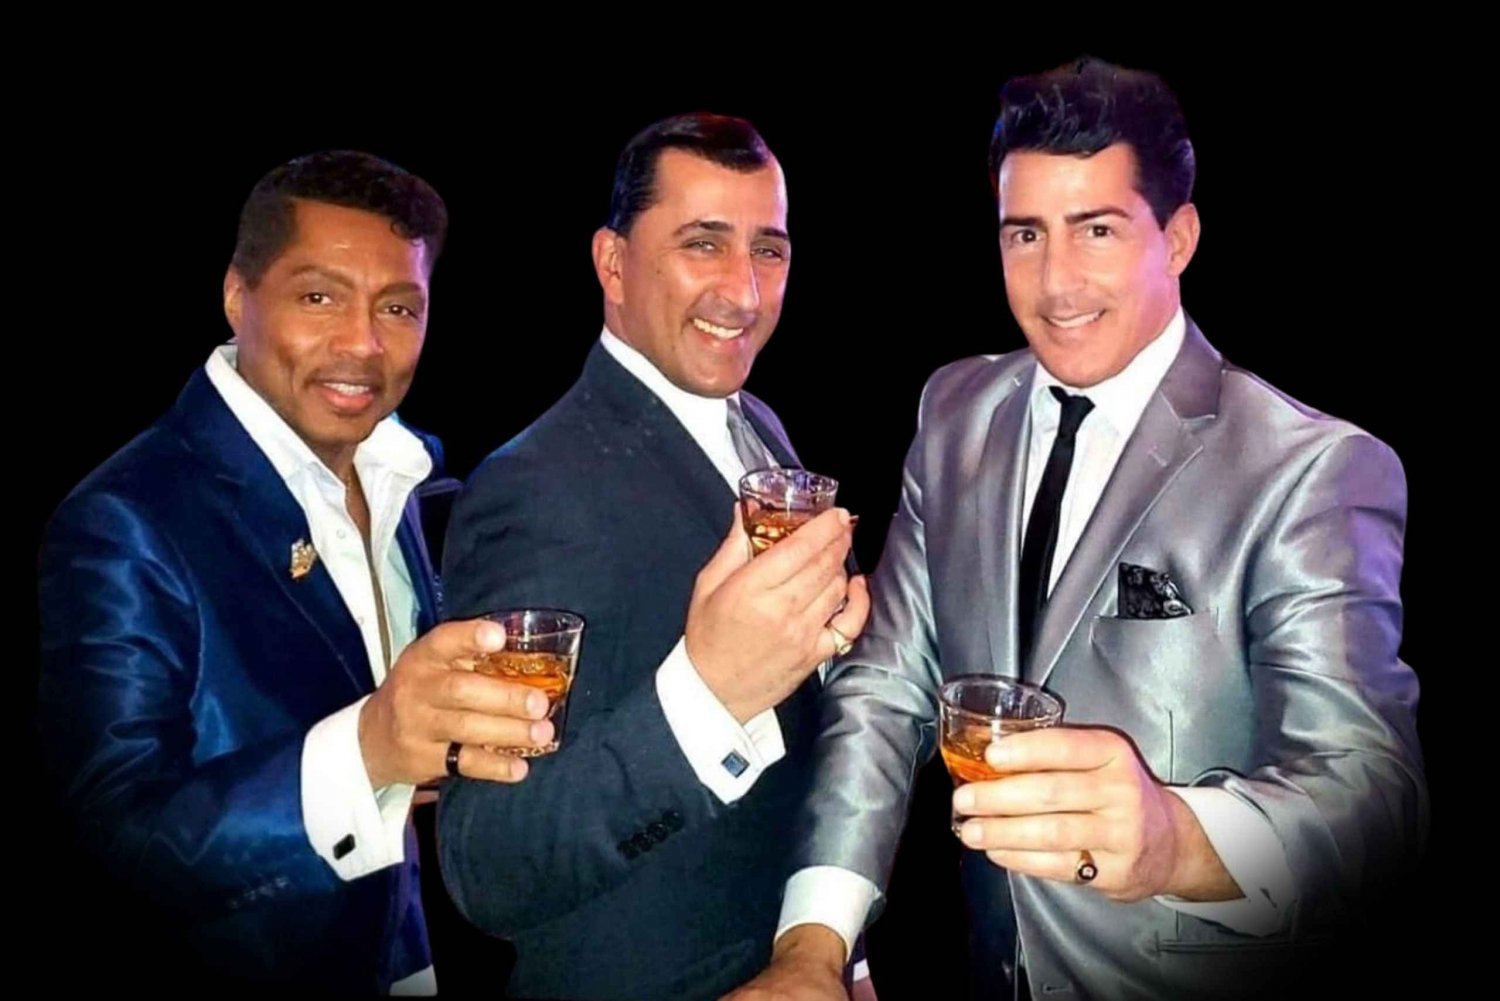 Las Vegasissa: The Rat Pack Is Back Live at the Tuscany: The Rat Pack Is Back Live at the Tuscany